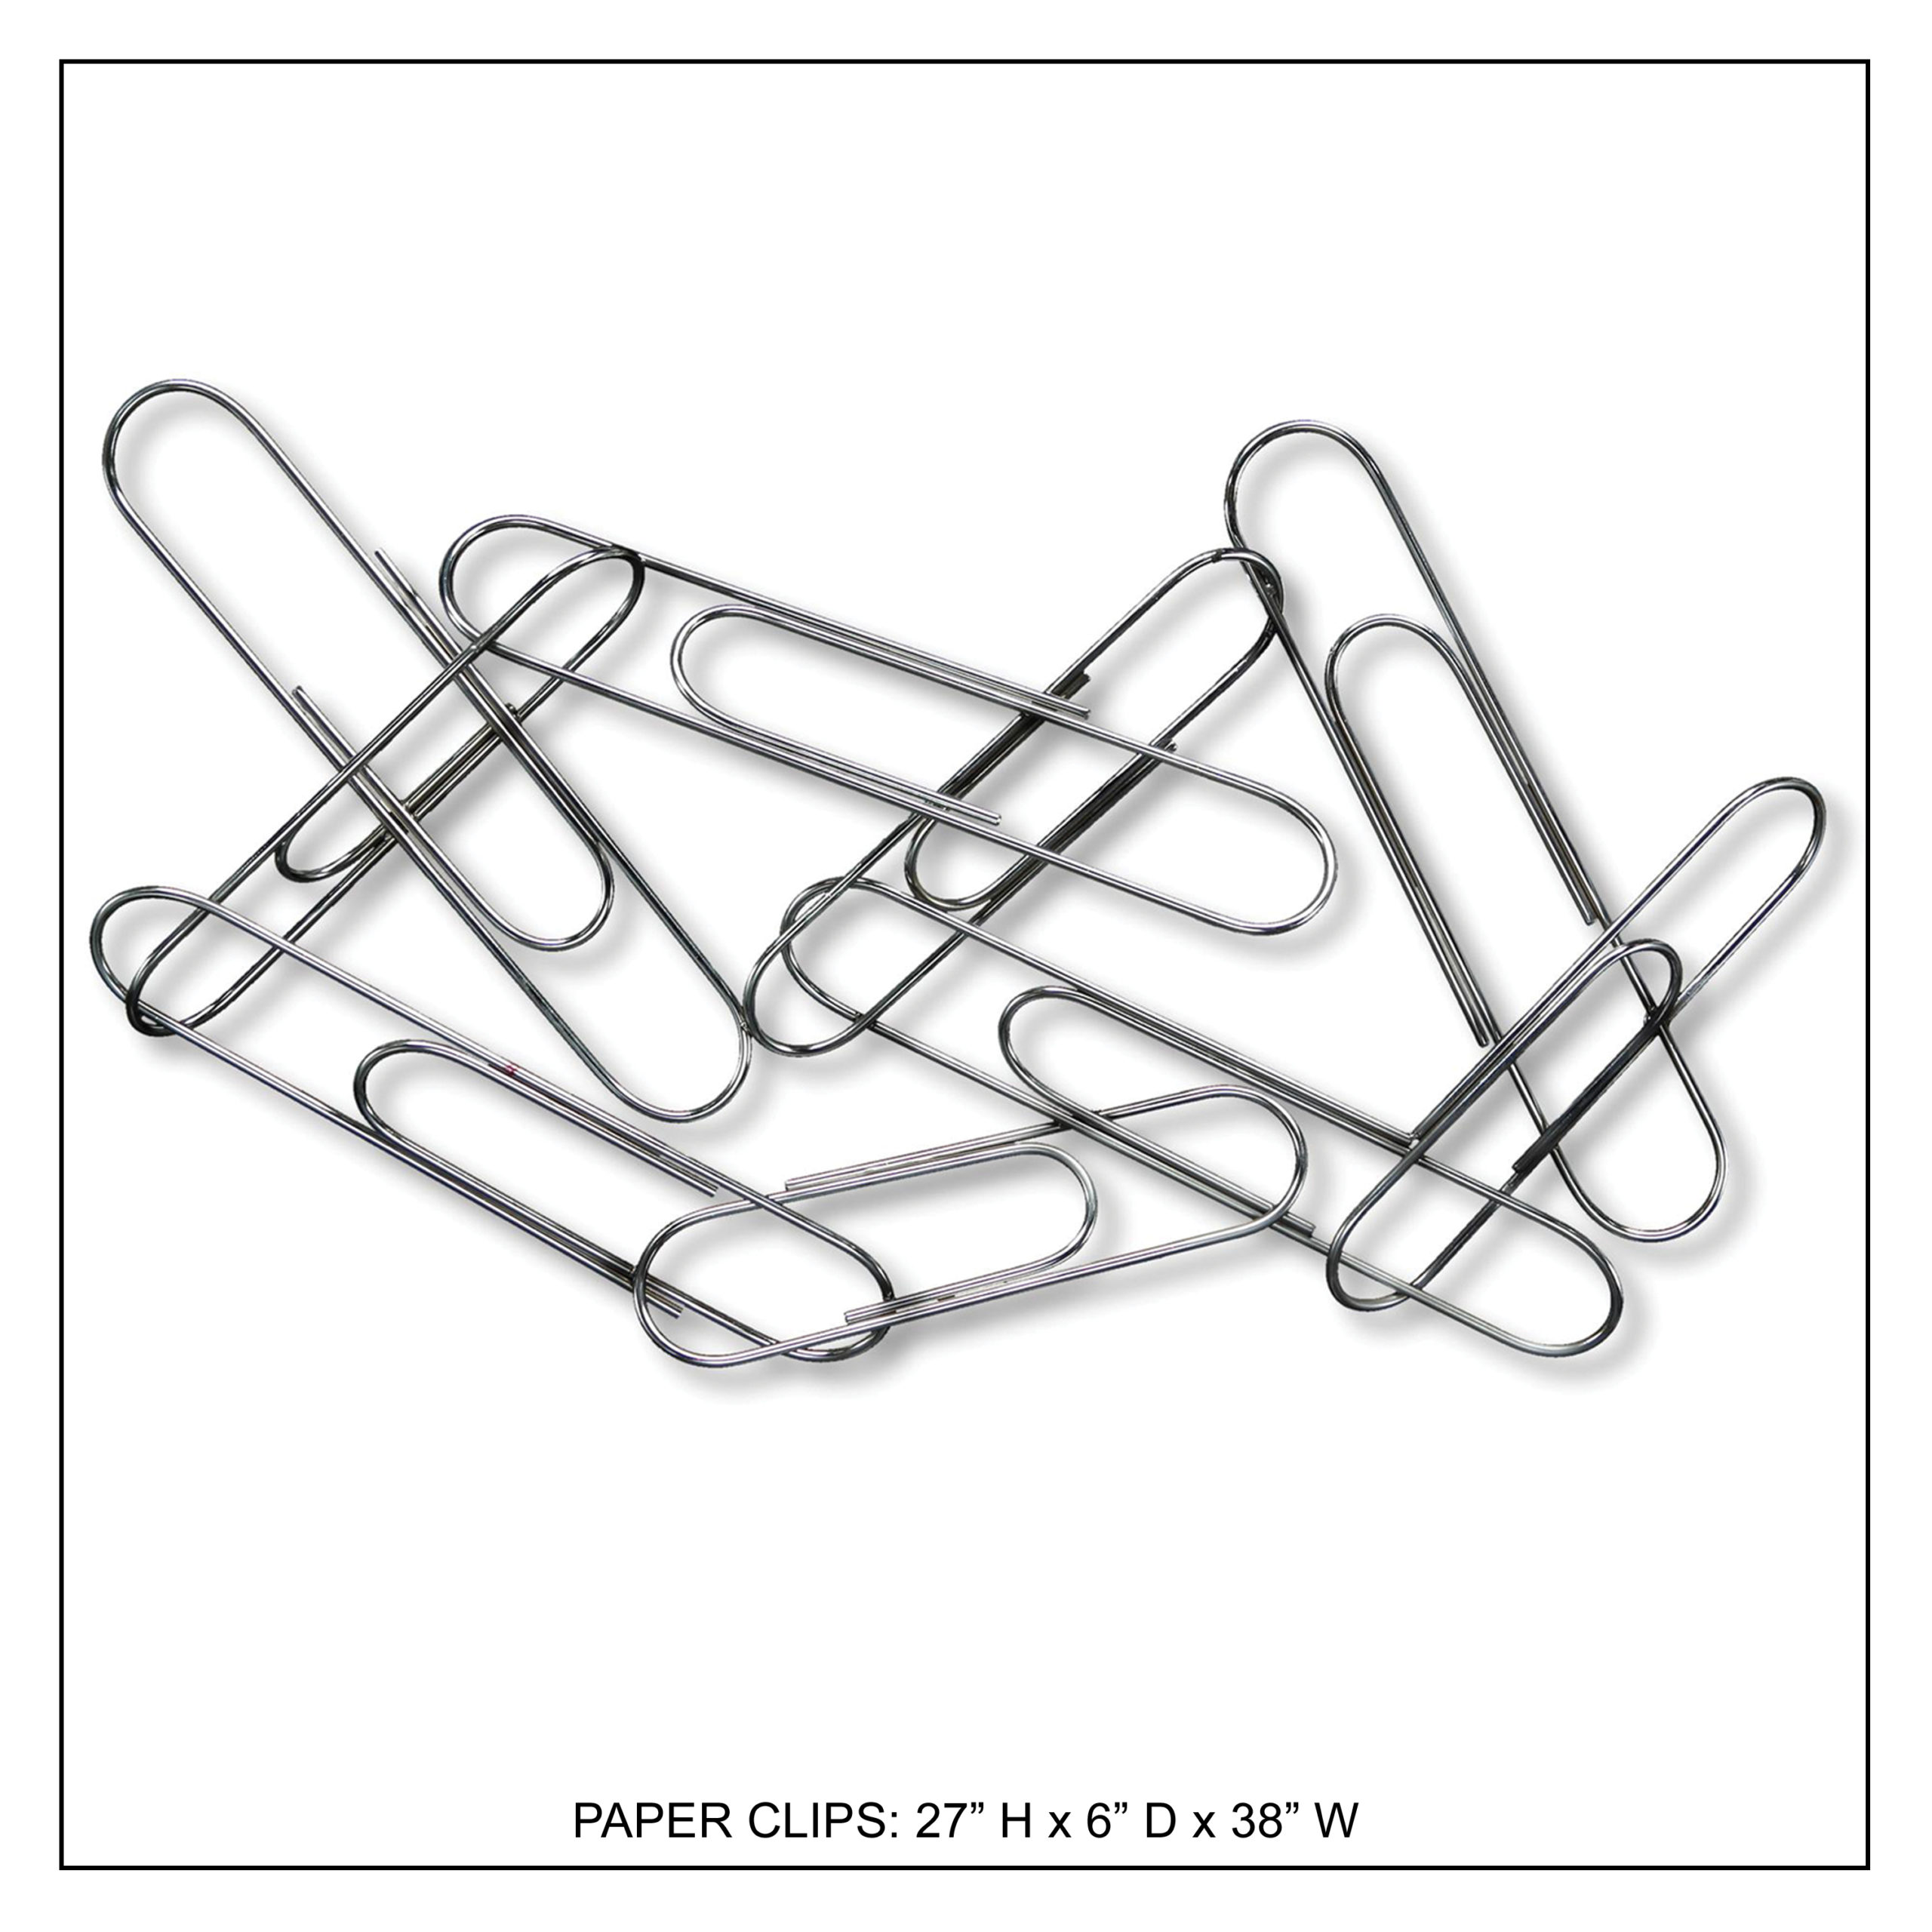 Paper Clips Handcrafted Metal Wall Decor Innomax